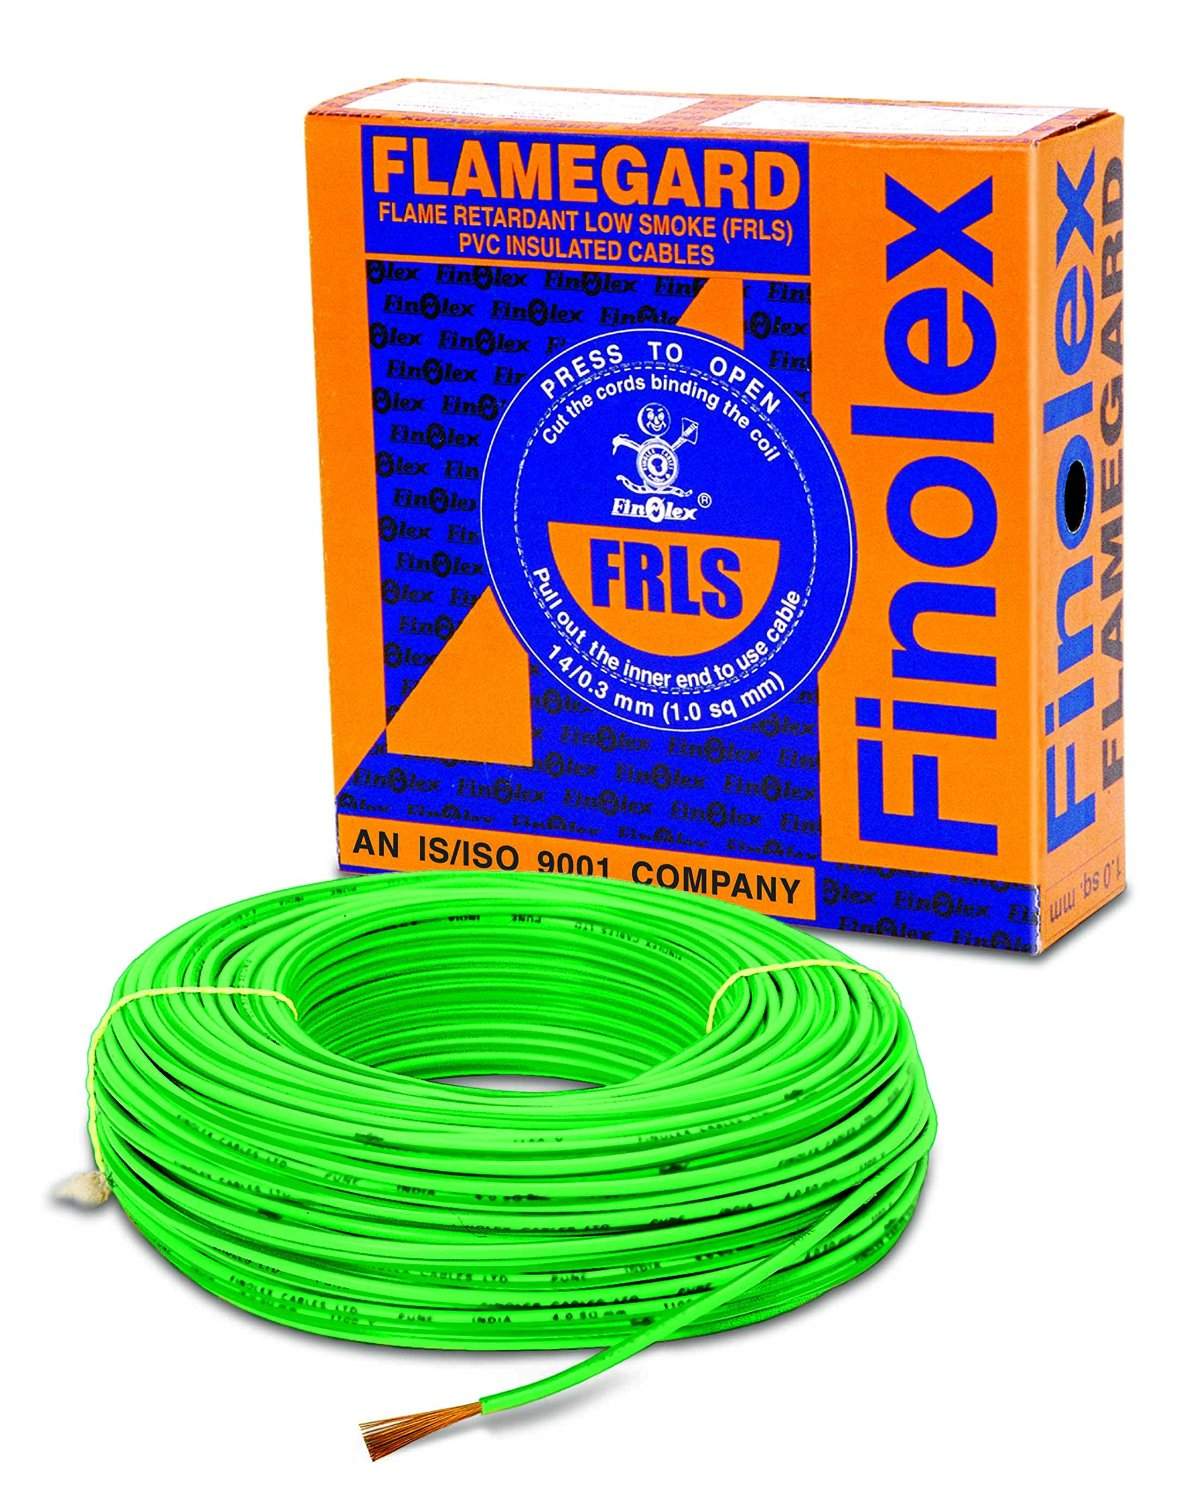 Flame Guard FRLS Cables